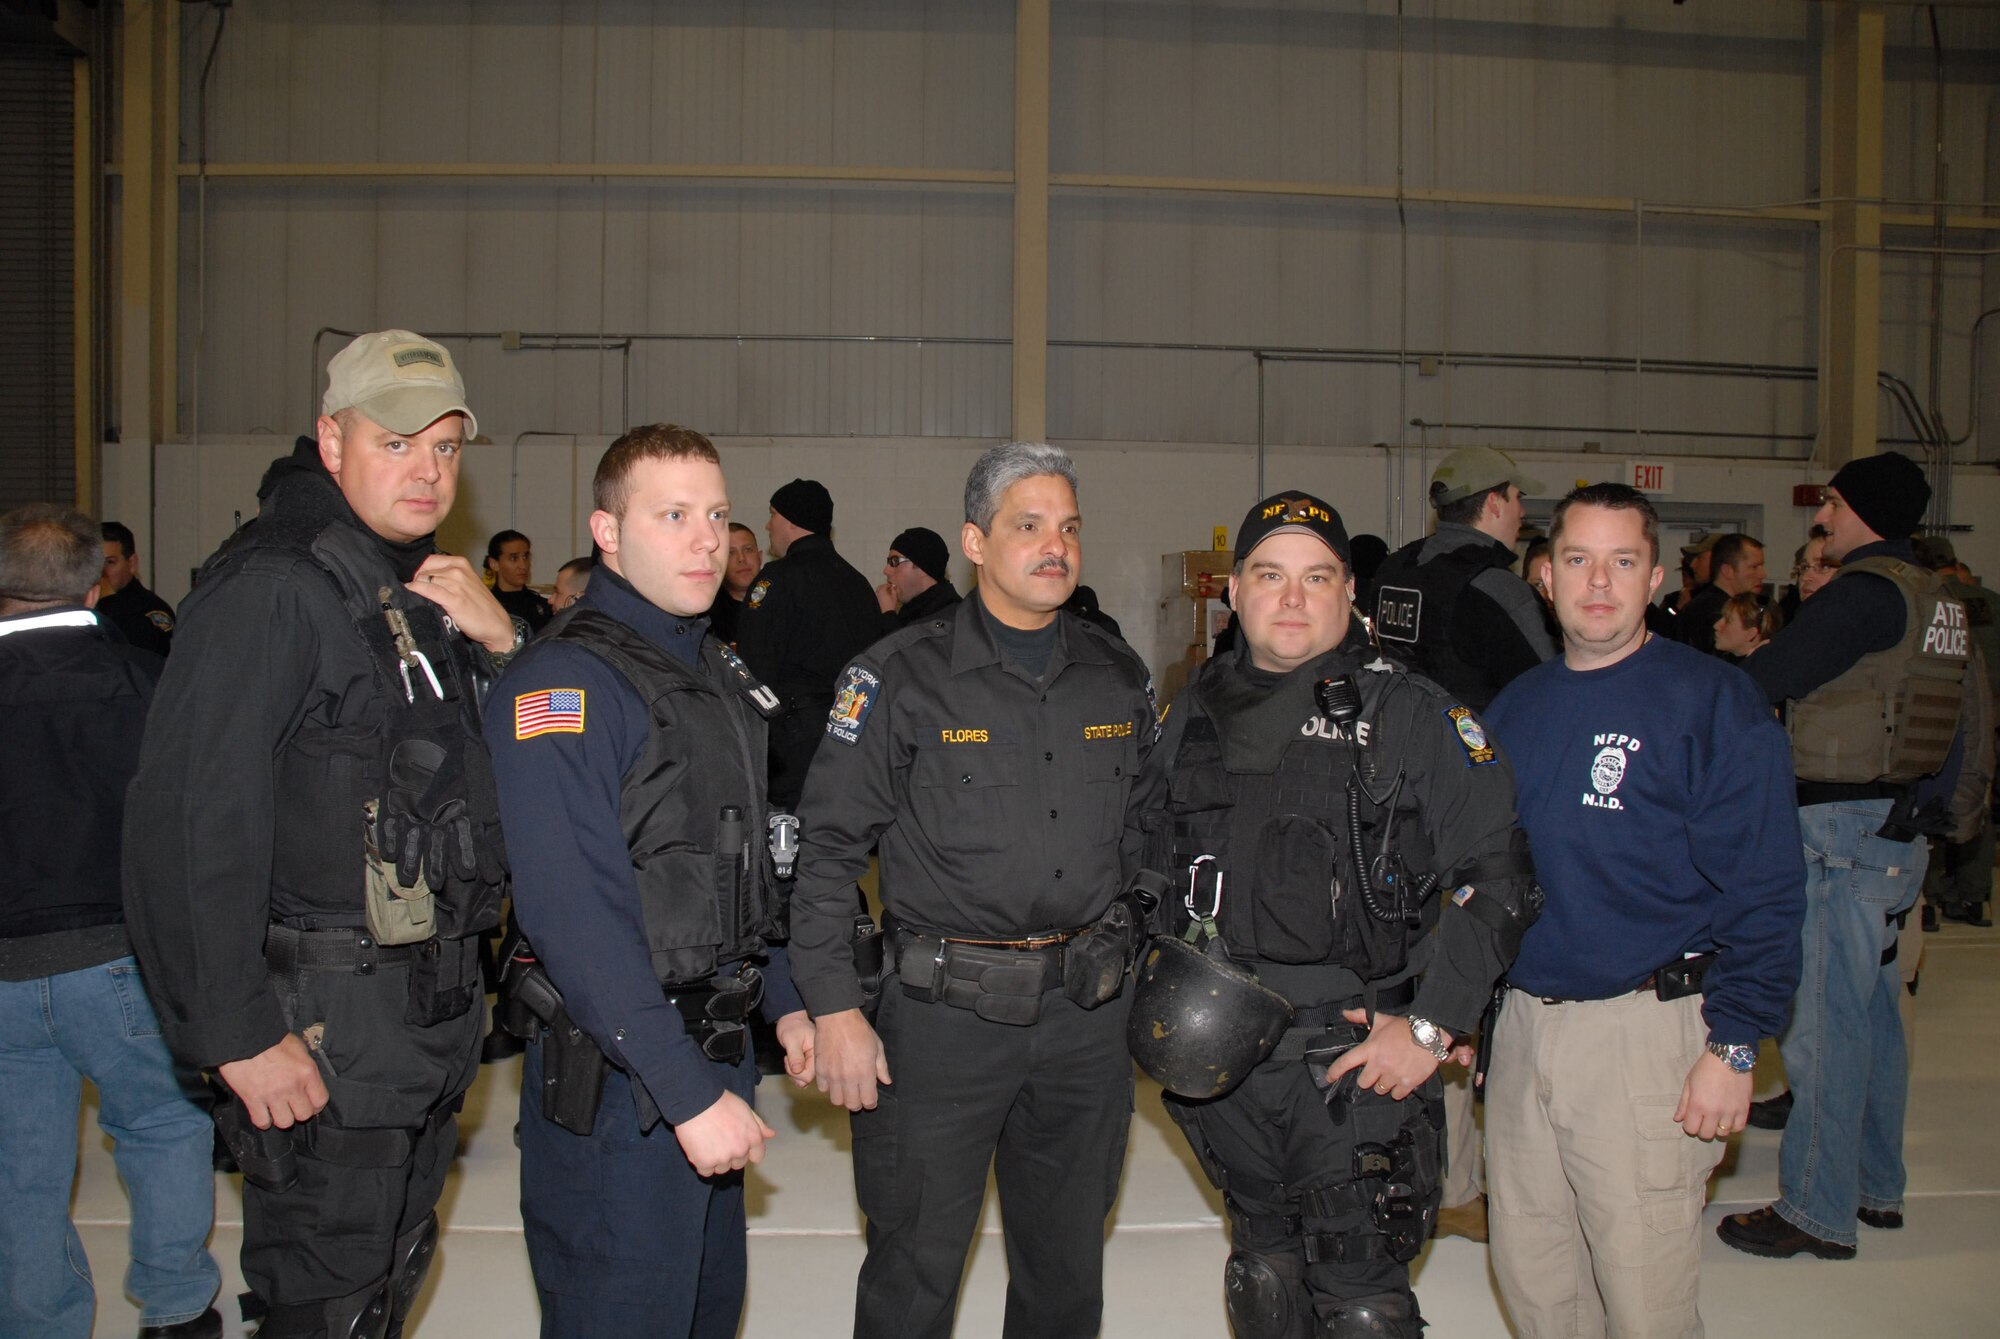 Members of the 107th Airlift Wing prepare to rid the streets of local gang thugs. From left: Command Chief Richard King, Staff Sgt. Tommy Rodgers, Master Sgt. Ricardo Flores, Capt. Bryan Dalporto and Master Sgt. Shawn Larrabee.